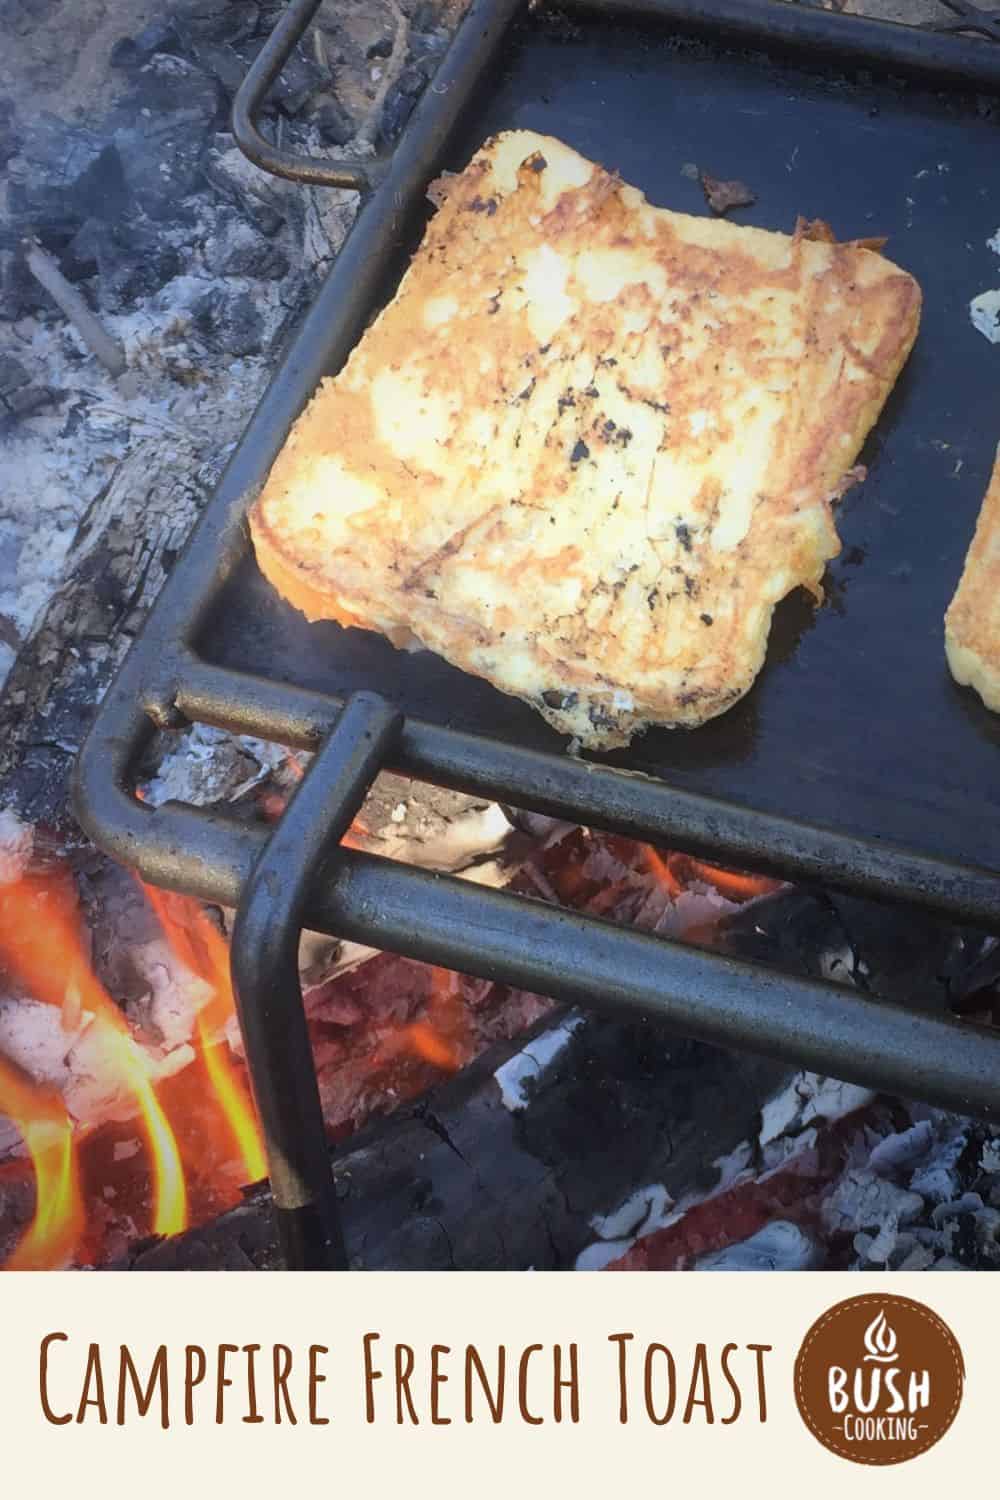 https://bushcooking.com/wp-content/uploads/2017/10/Campfire-French-Toast-9.jpg